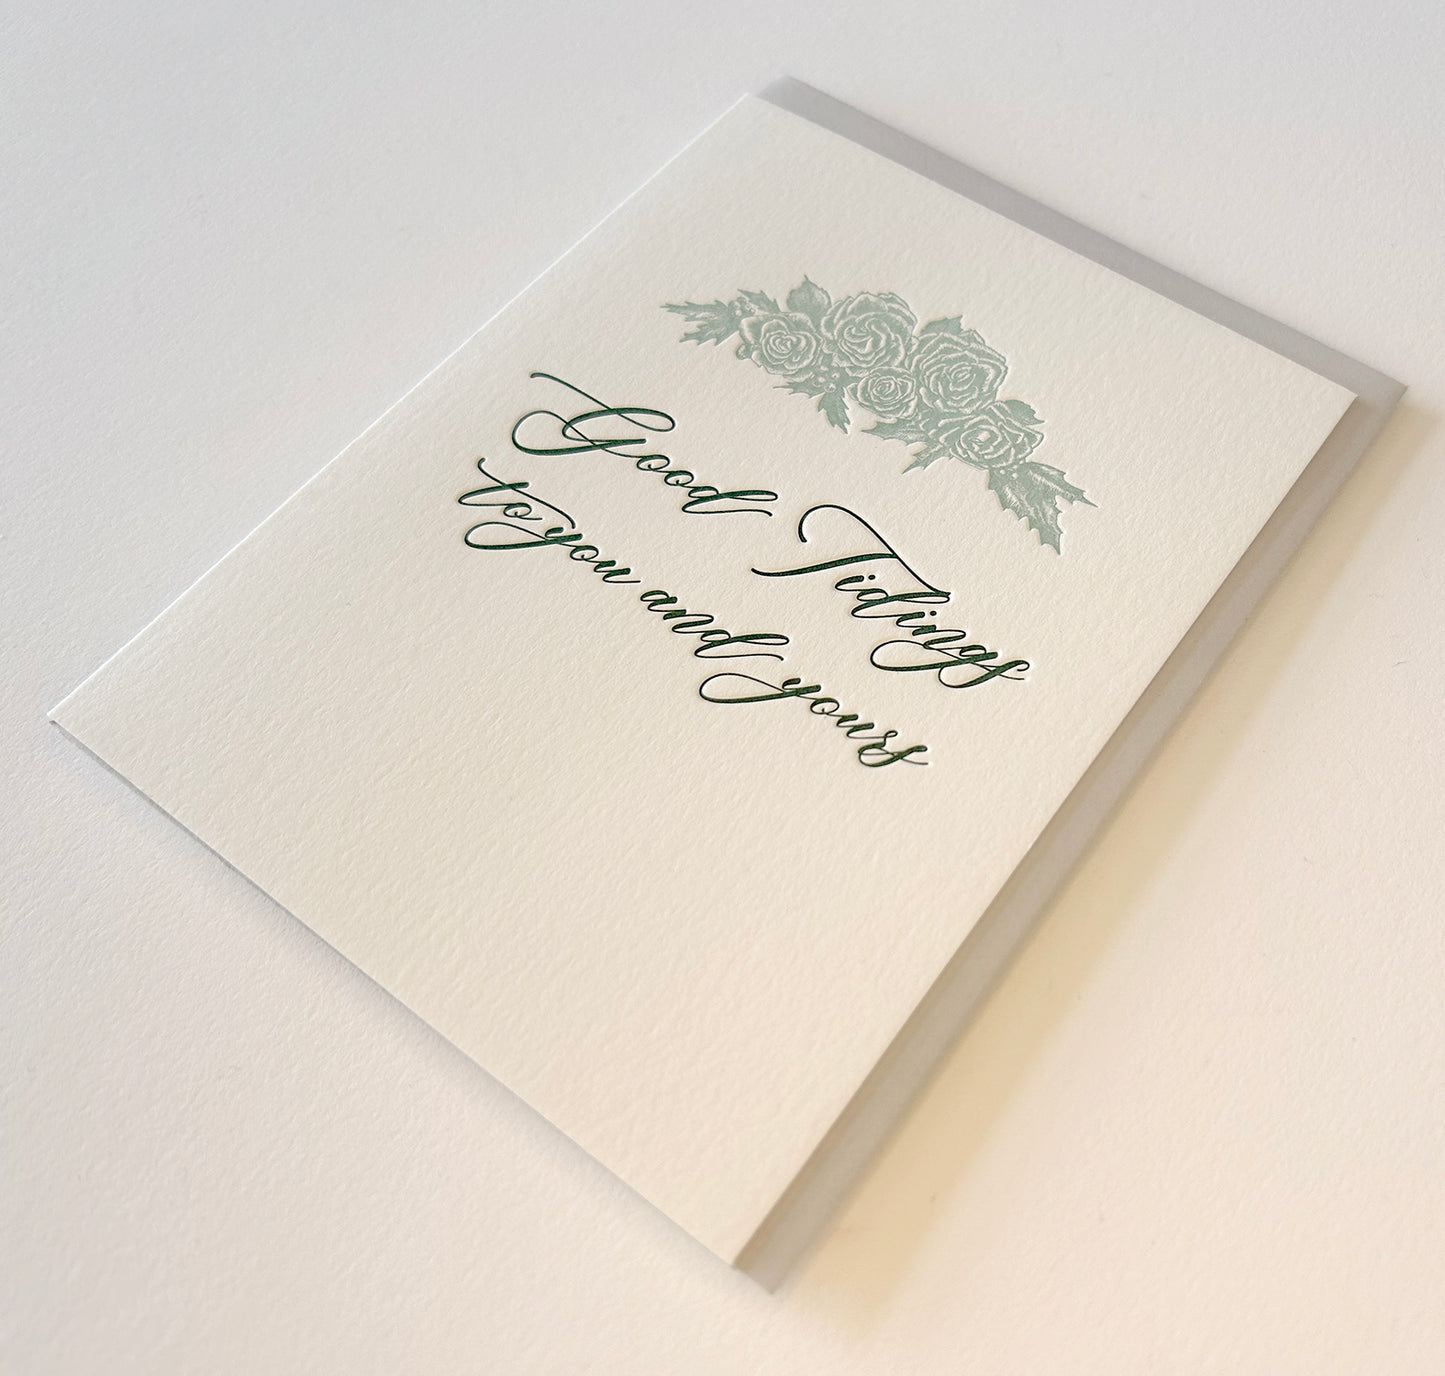 Letterpress holiday card with florals that says " Good tidings to you and yours" by Rust Belt Love